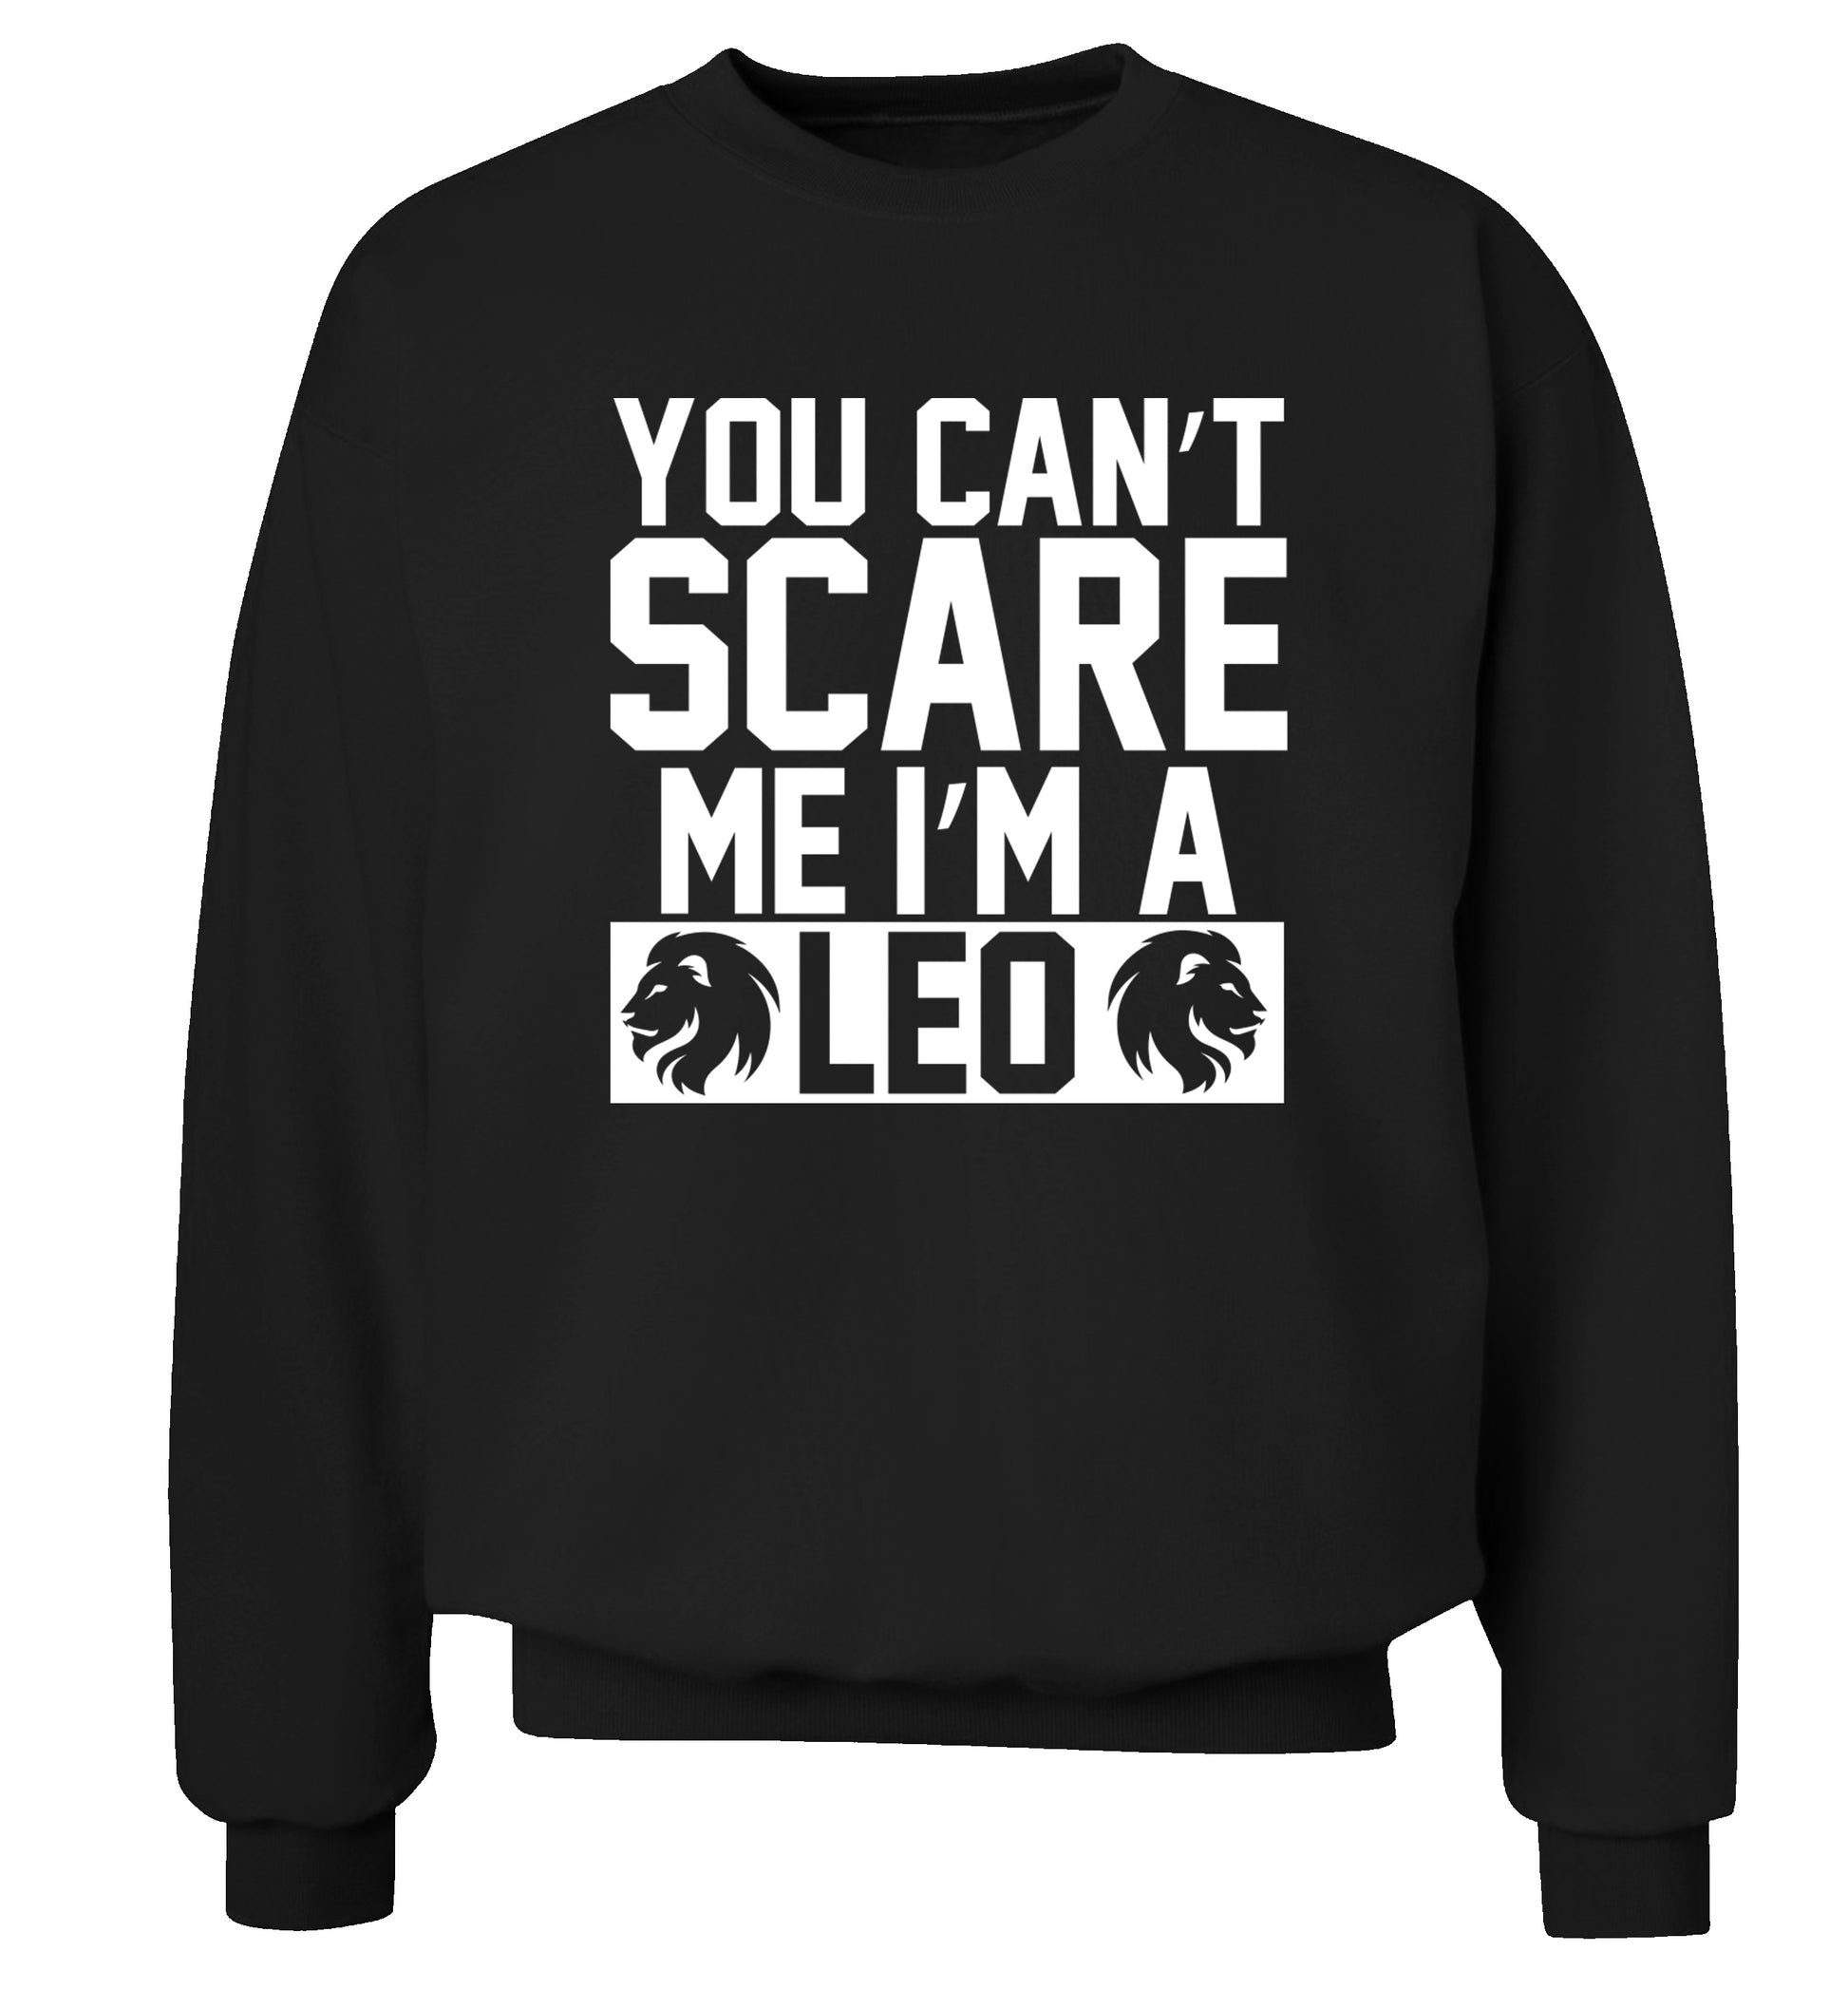 You can't scare me I'm a leo Adult's unisex black Sweater 2XL